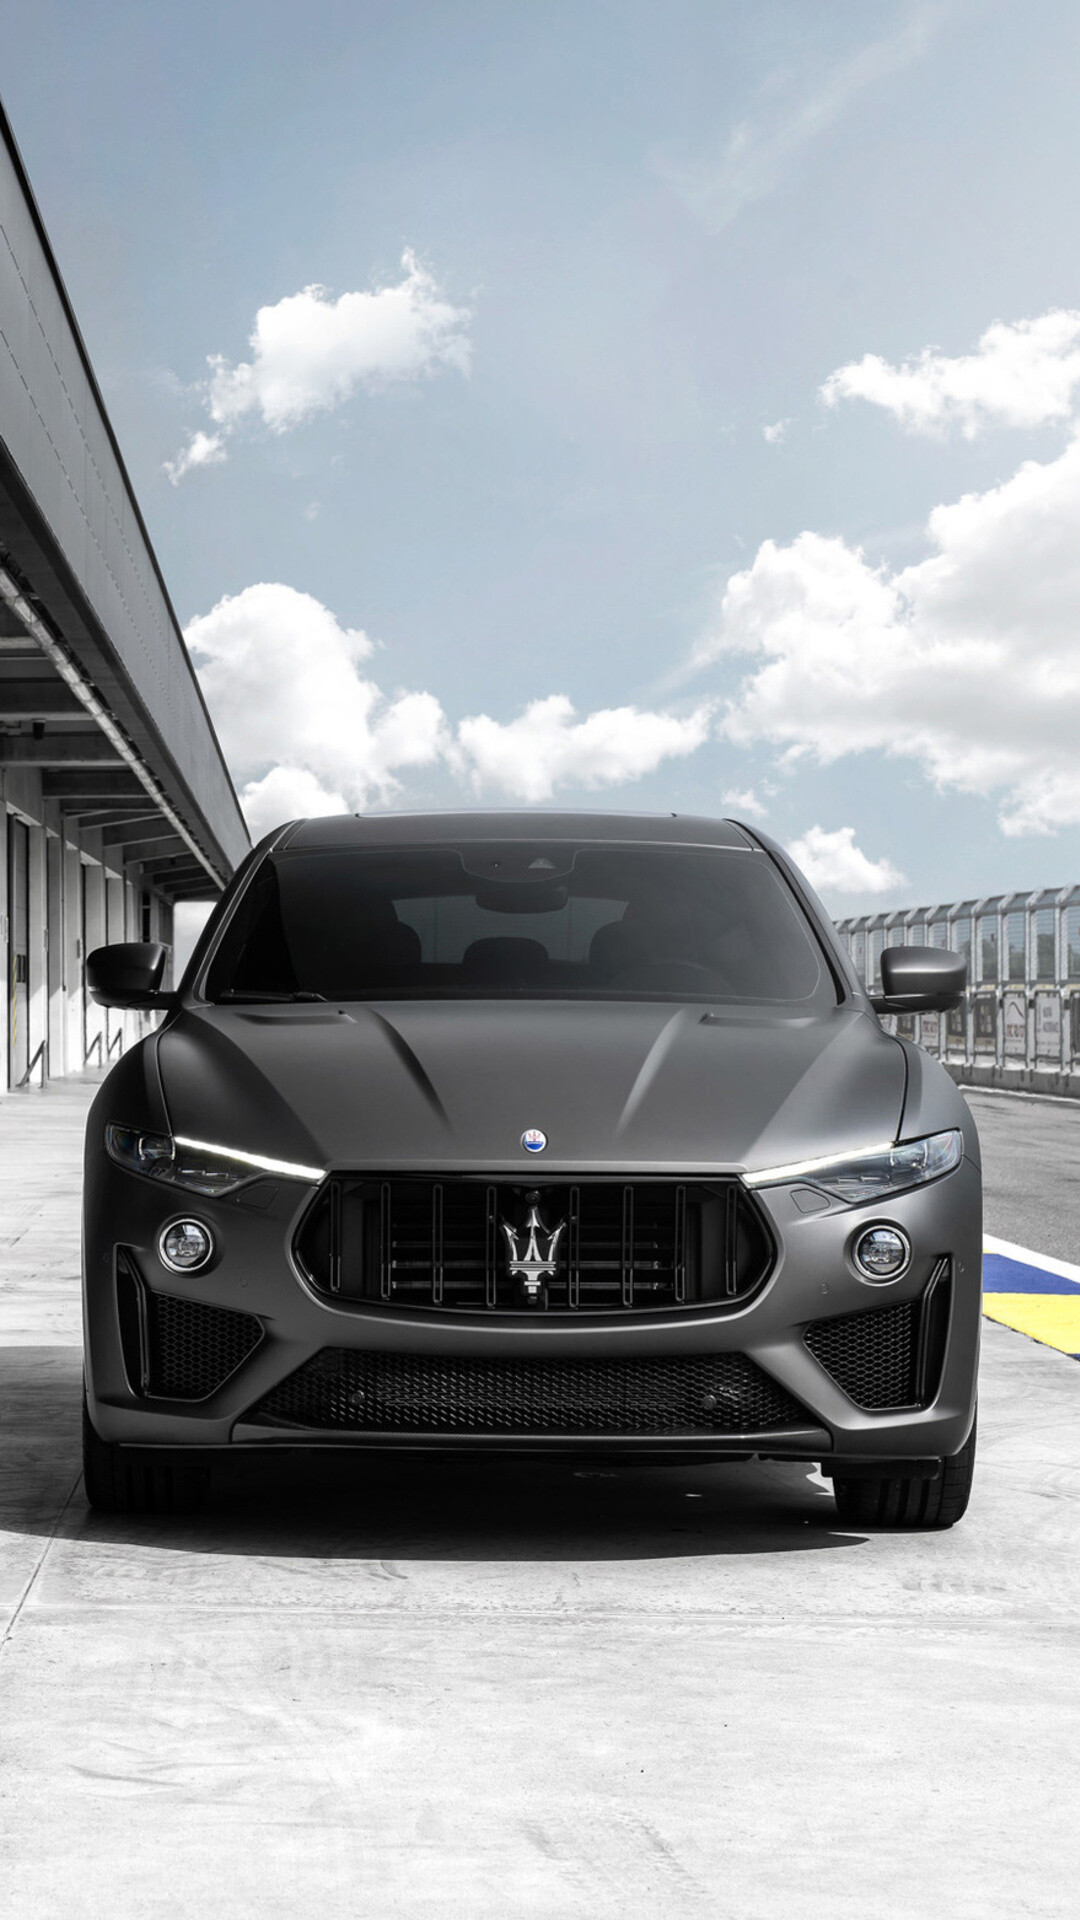 Maserati: Levante Trofeo, 2018, The fastest high-end company's SUV, equipped with a V8 engine. 1080x1920 Full HD Wallpaper.